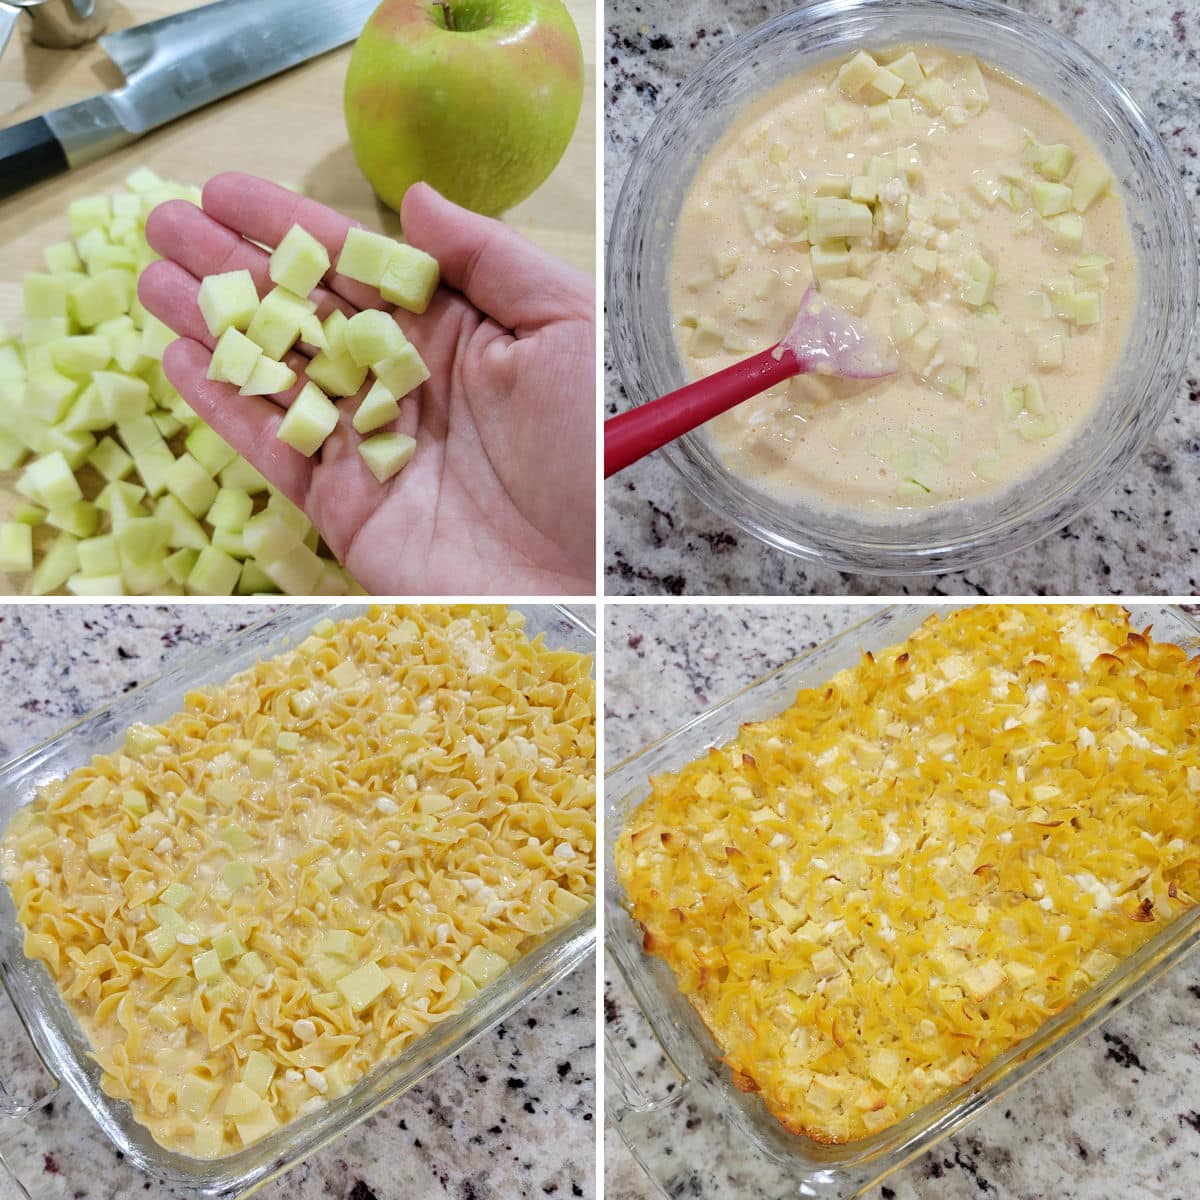 Making sweet noodle kugel with chopped apples.